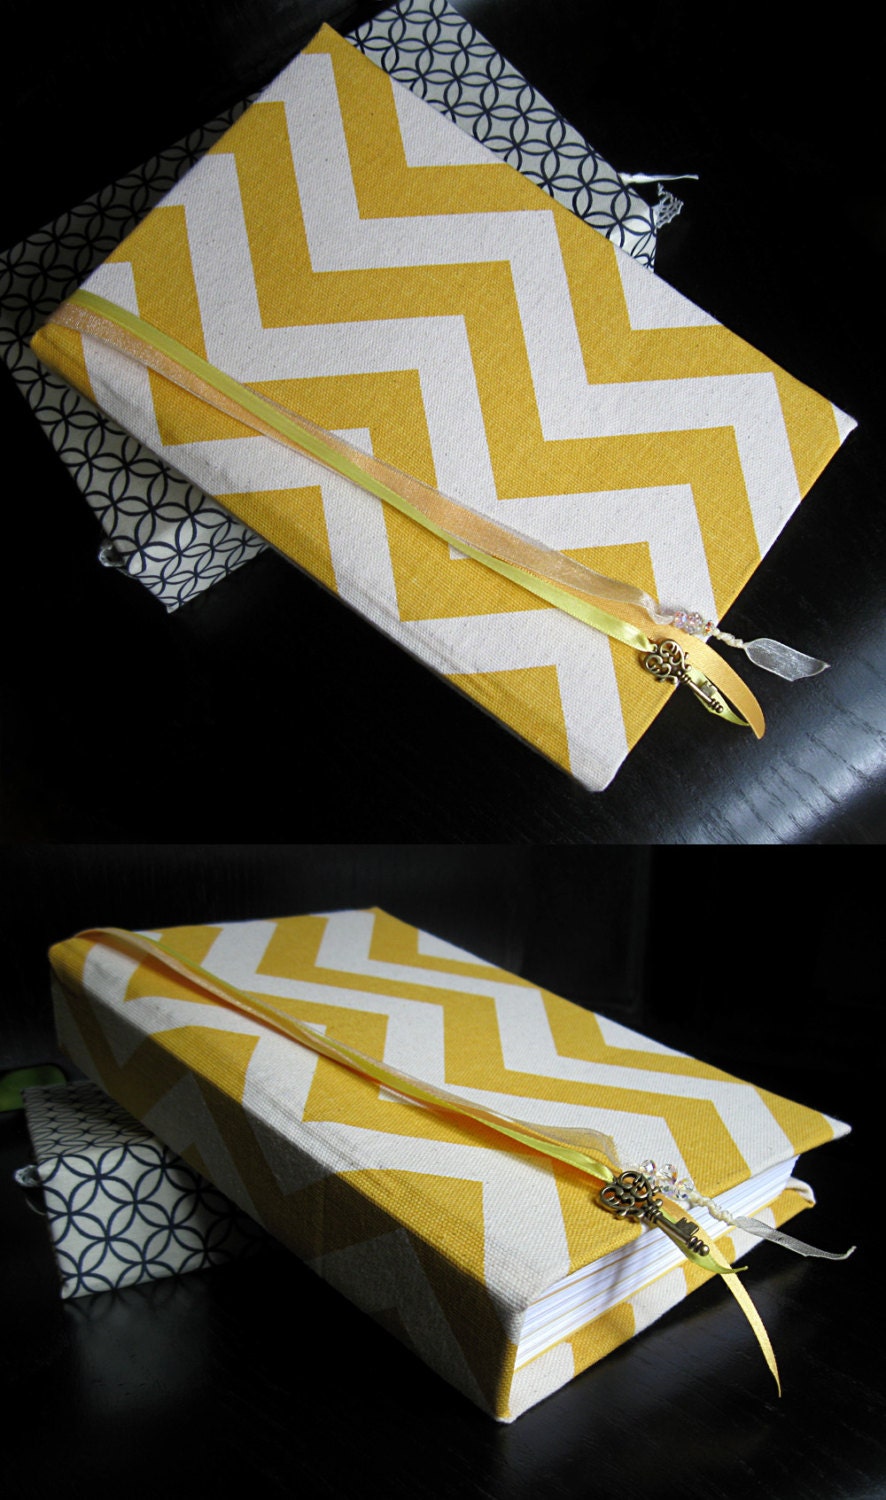 Custom Hand Bound Journal with Yellow and Ivory Chevron Cover, Sewn-In Ribbon Bookmarks, and Gold Key Charm